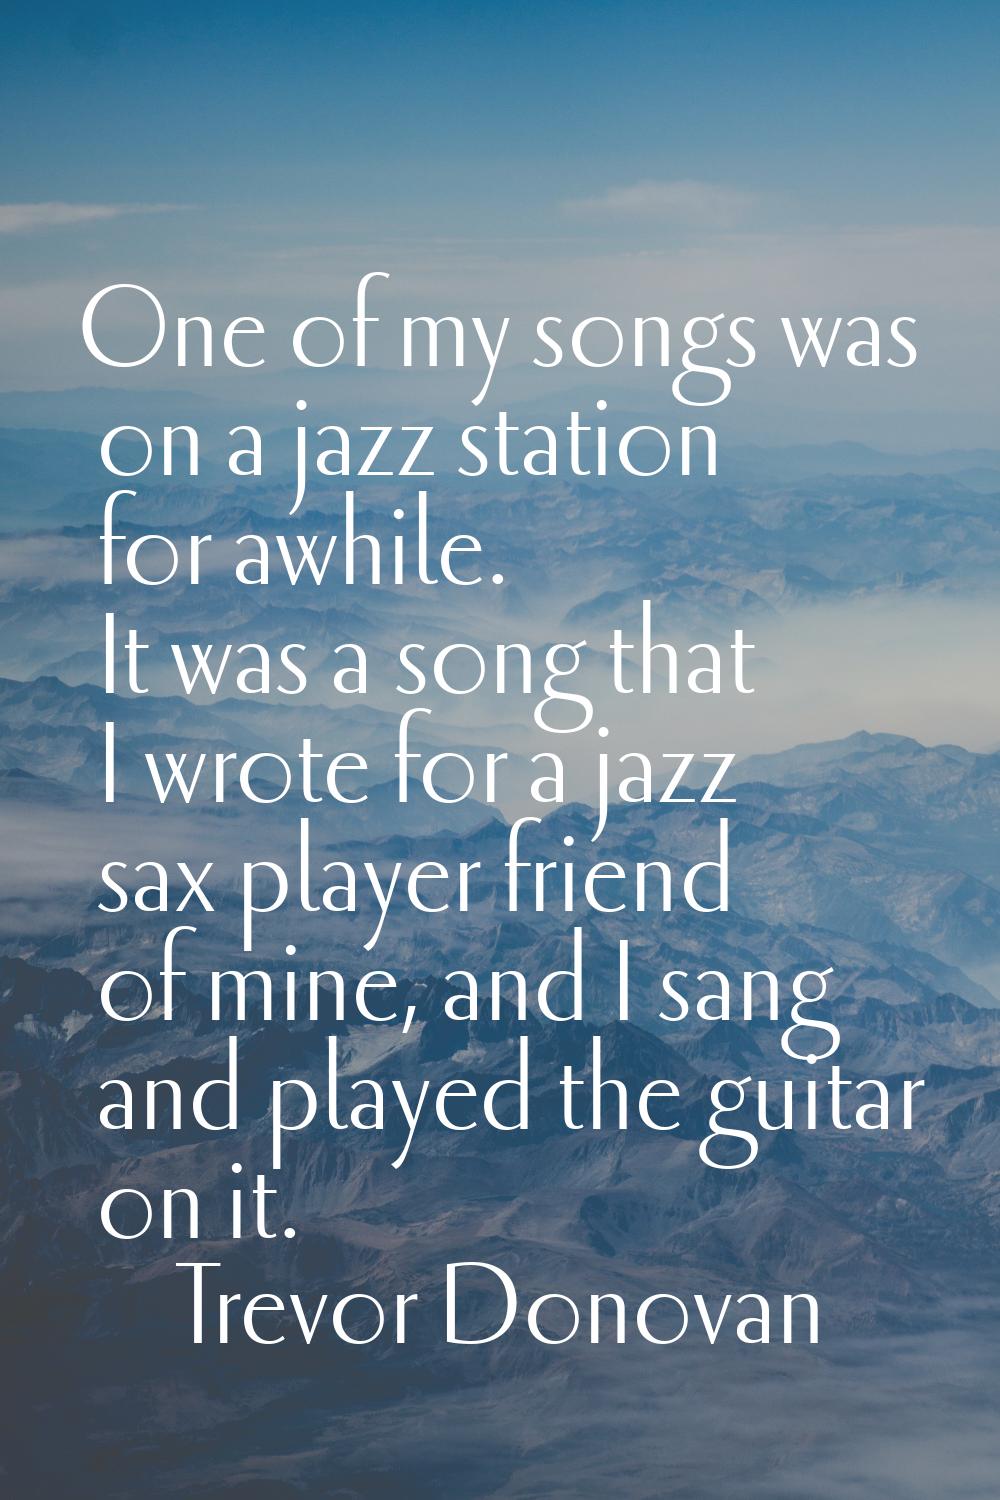 One of my songs was on a jazz station for awhile. It was a song that I wrote for a jazz sax player 